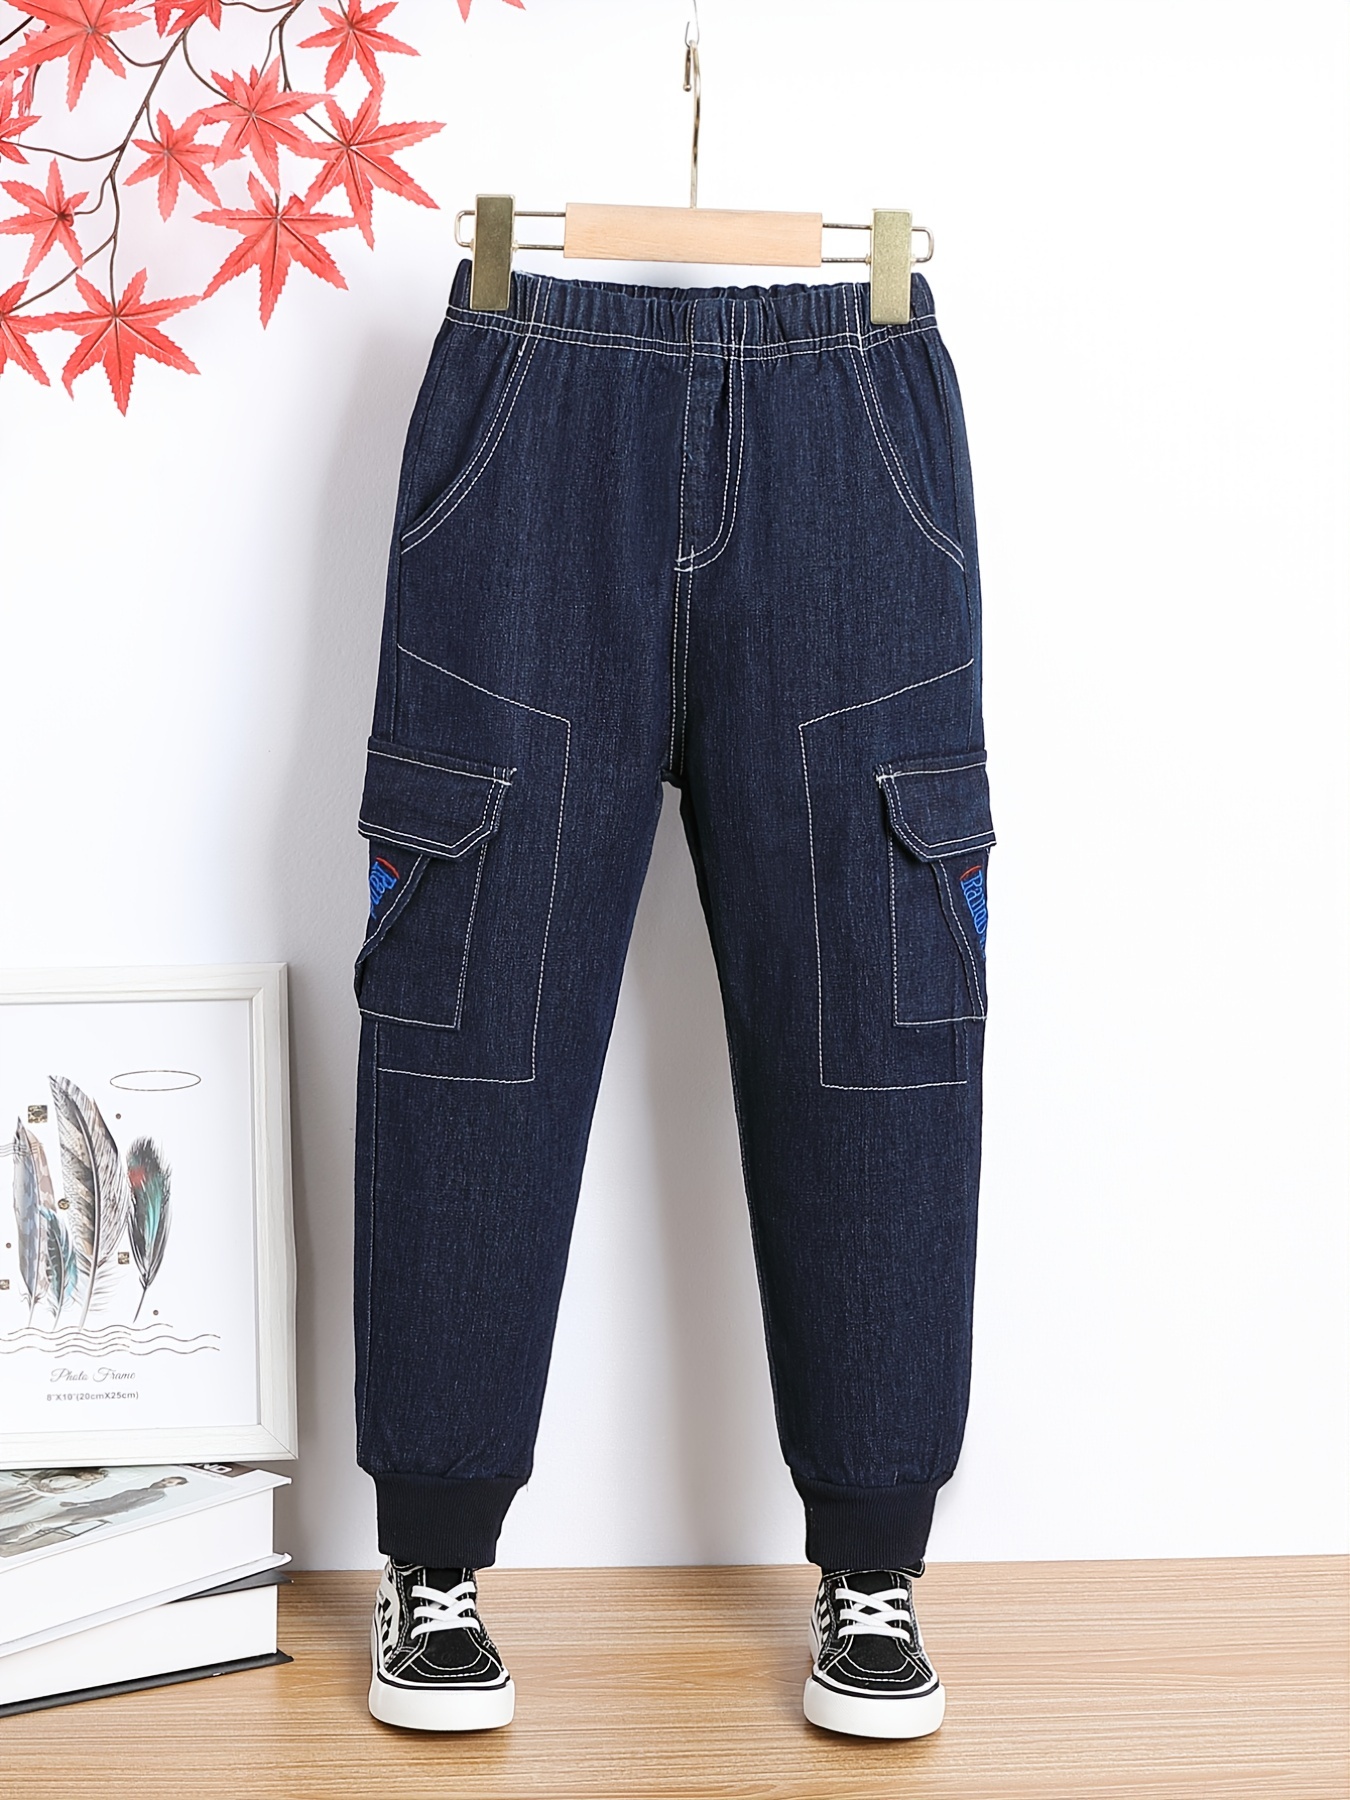 Women Denim Pants Elastic Waist Faded Loose Baggy Trousers Bloomers Jeans  Bottom Casual